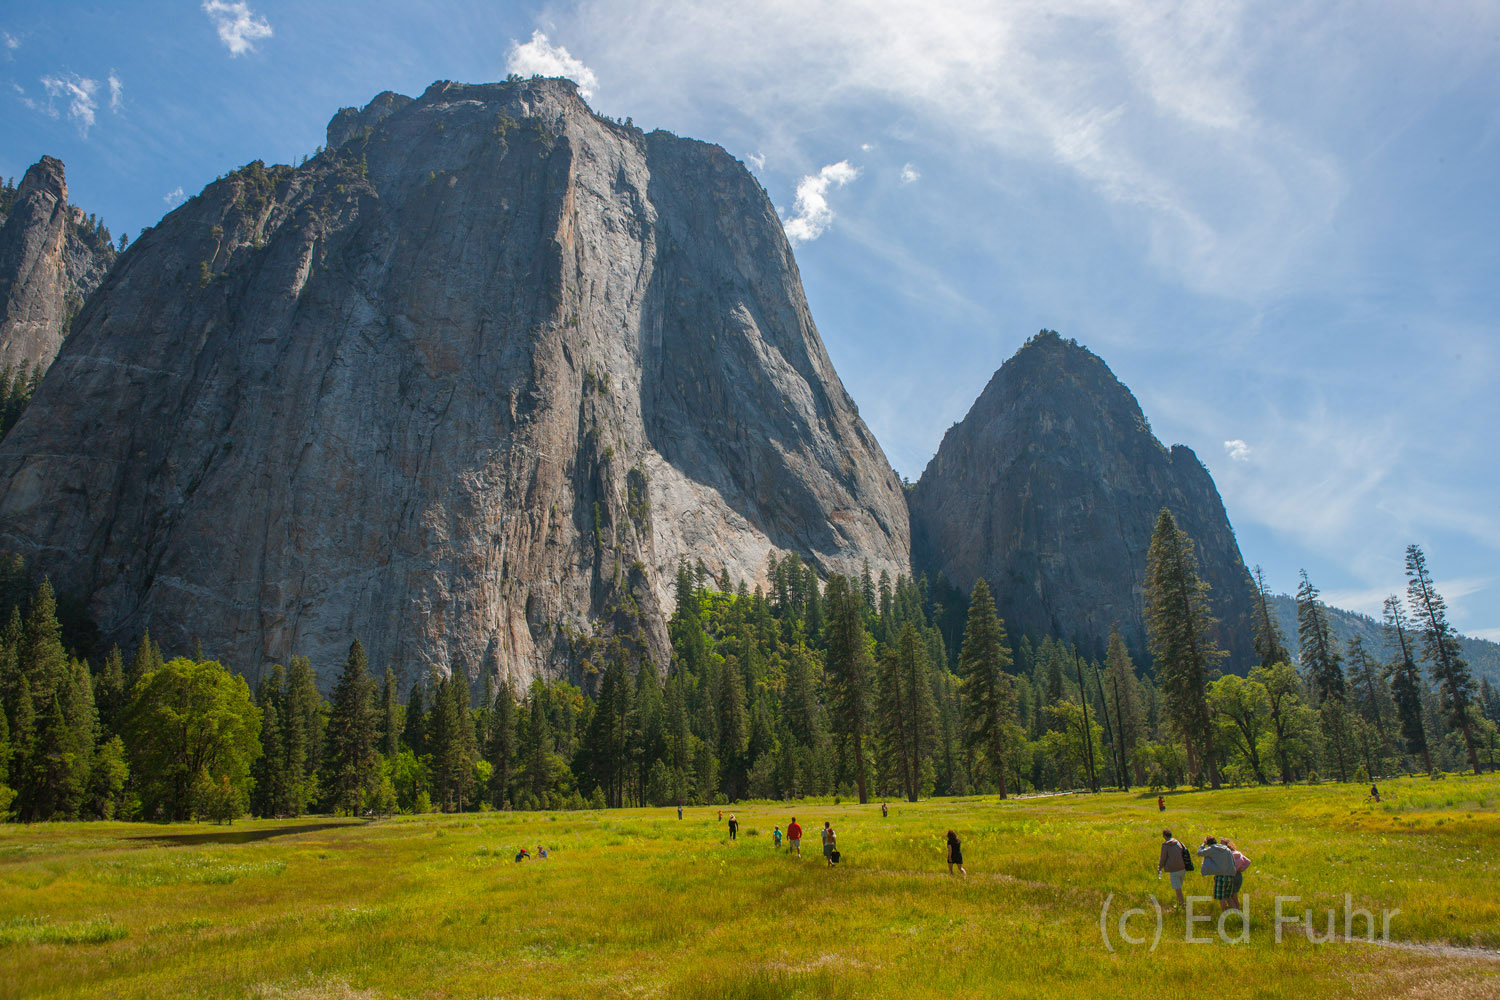 Hikers cross the valley below Cathedral Rock